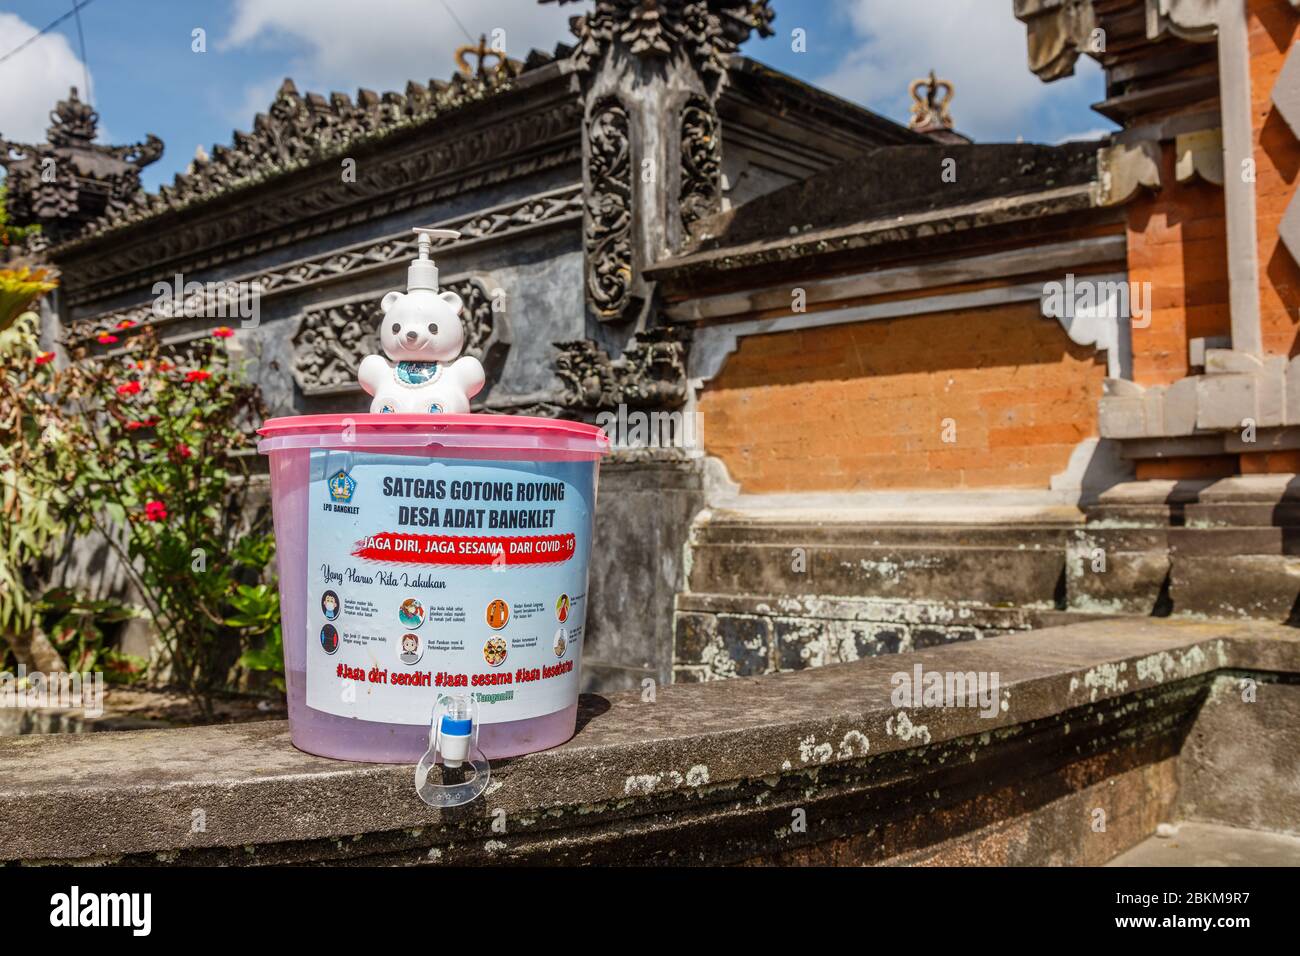 May 06, 2020. Bangli, Bali, Indonesia. Buckets for washing hands provided by local government. Hygiene campaign during COVID 19 virus pandemic. Stock Photo